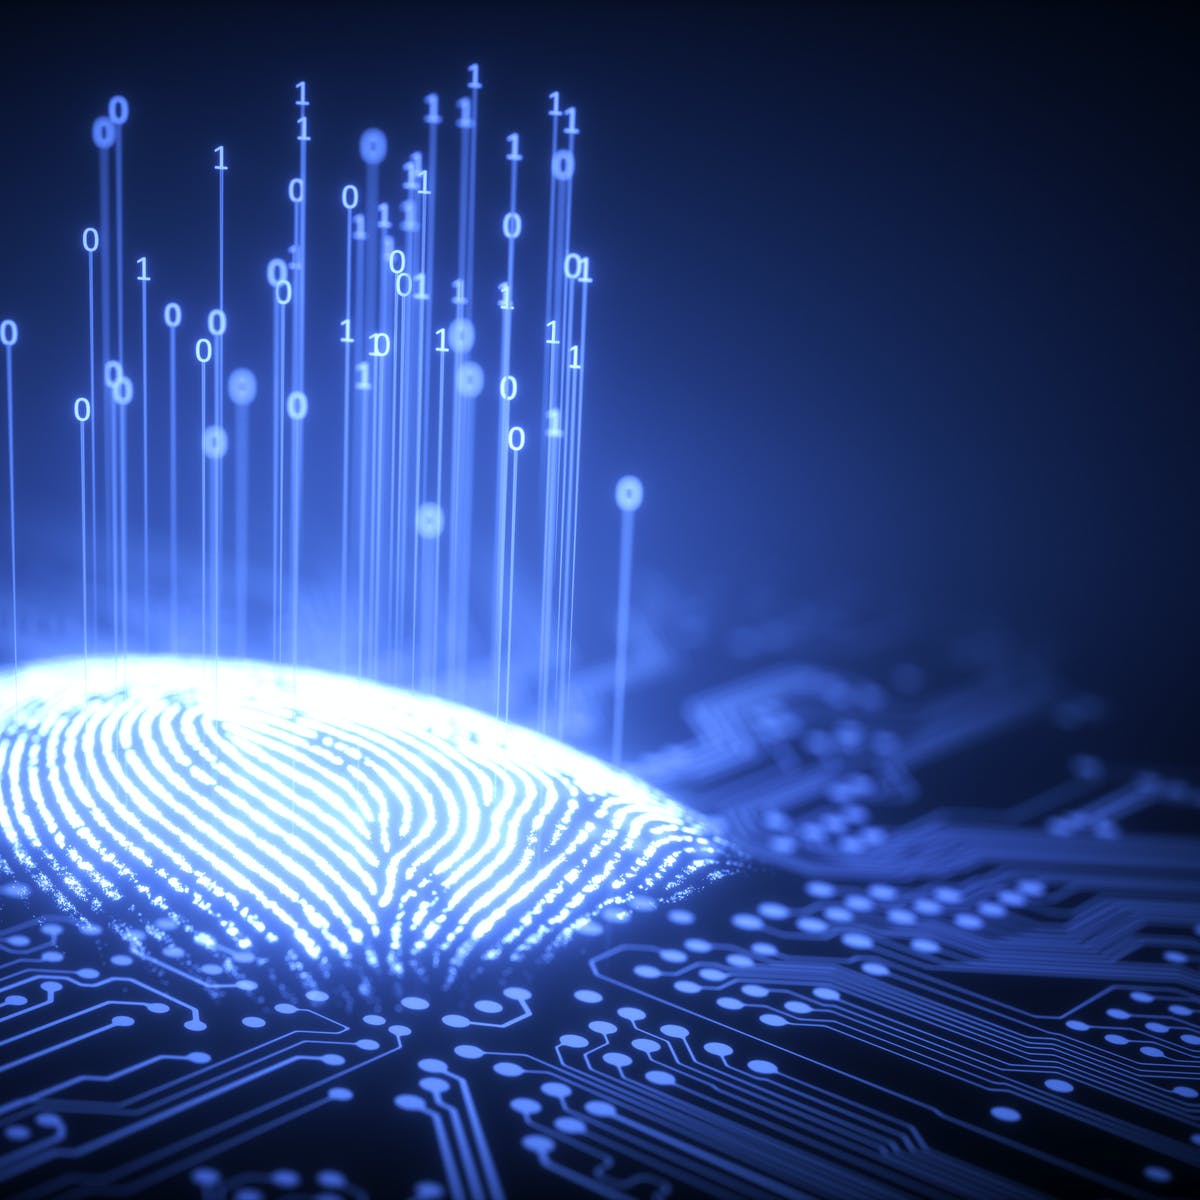 Cryptographic Key Generation From Biometric Data